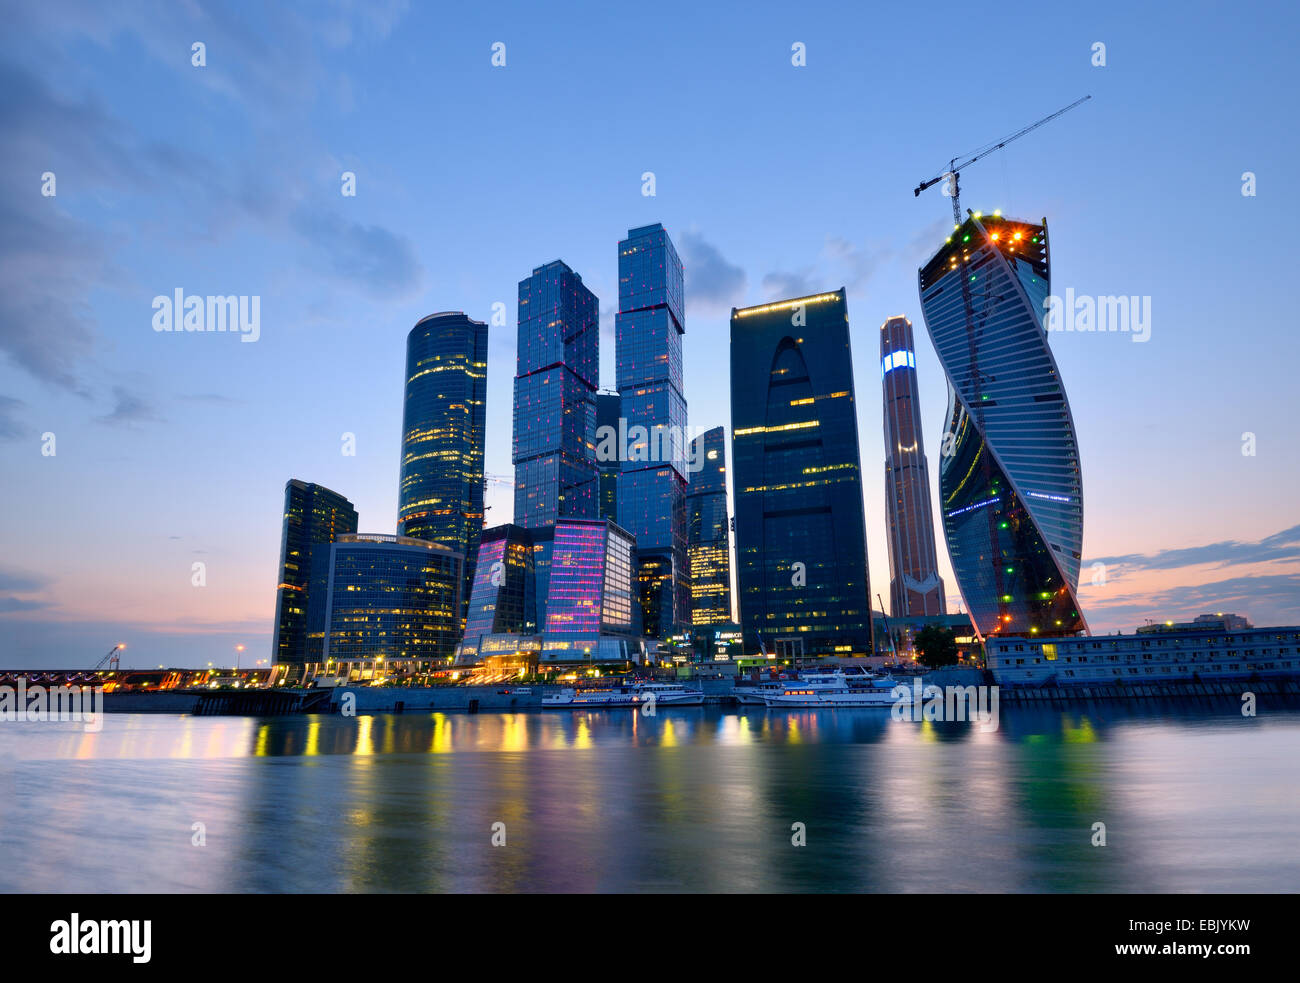 View of skyscrapers on Moskva river at night, Moscow, Russia Stock Photo